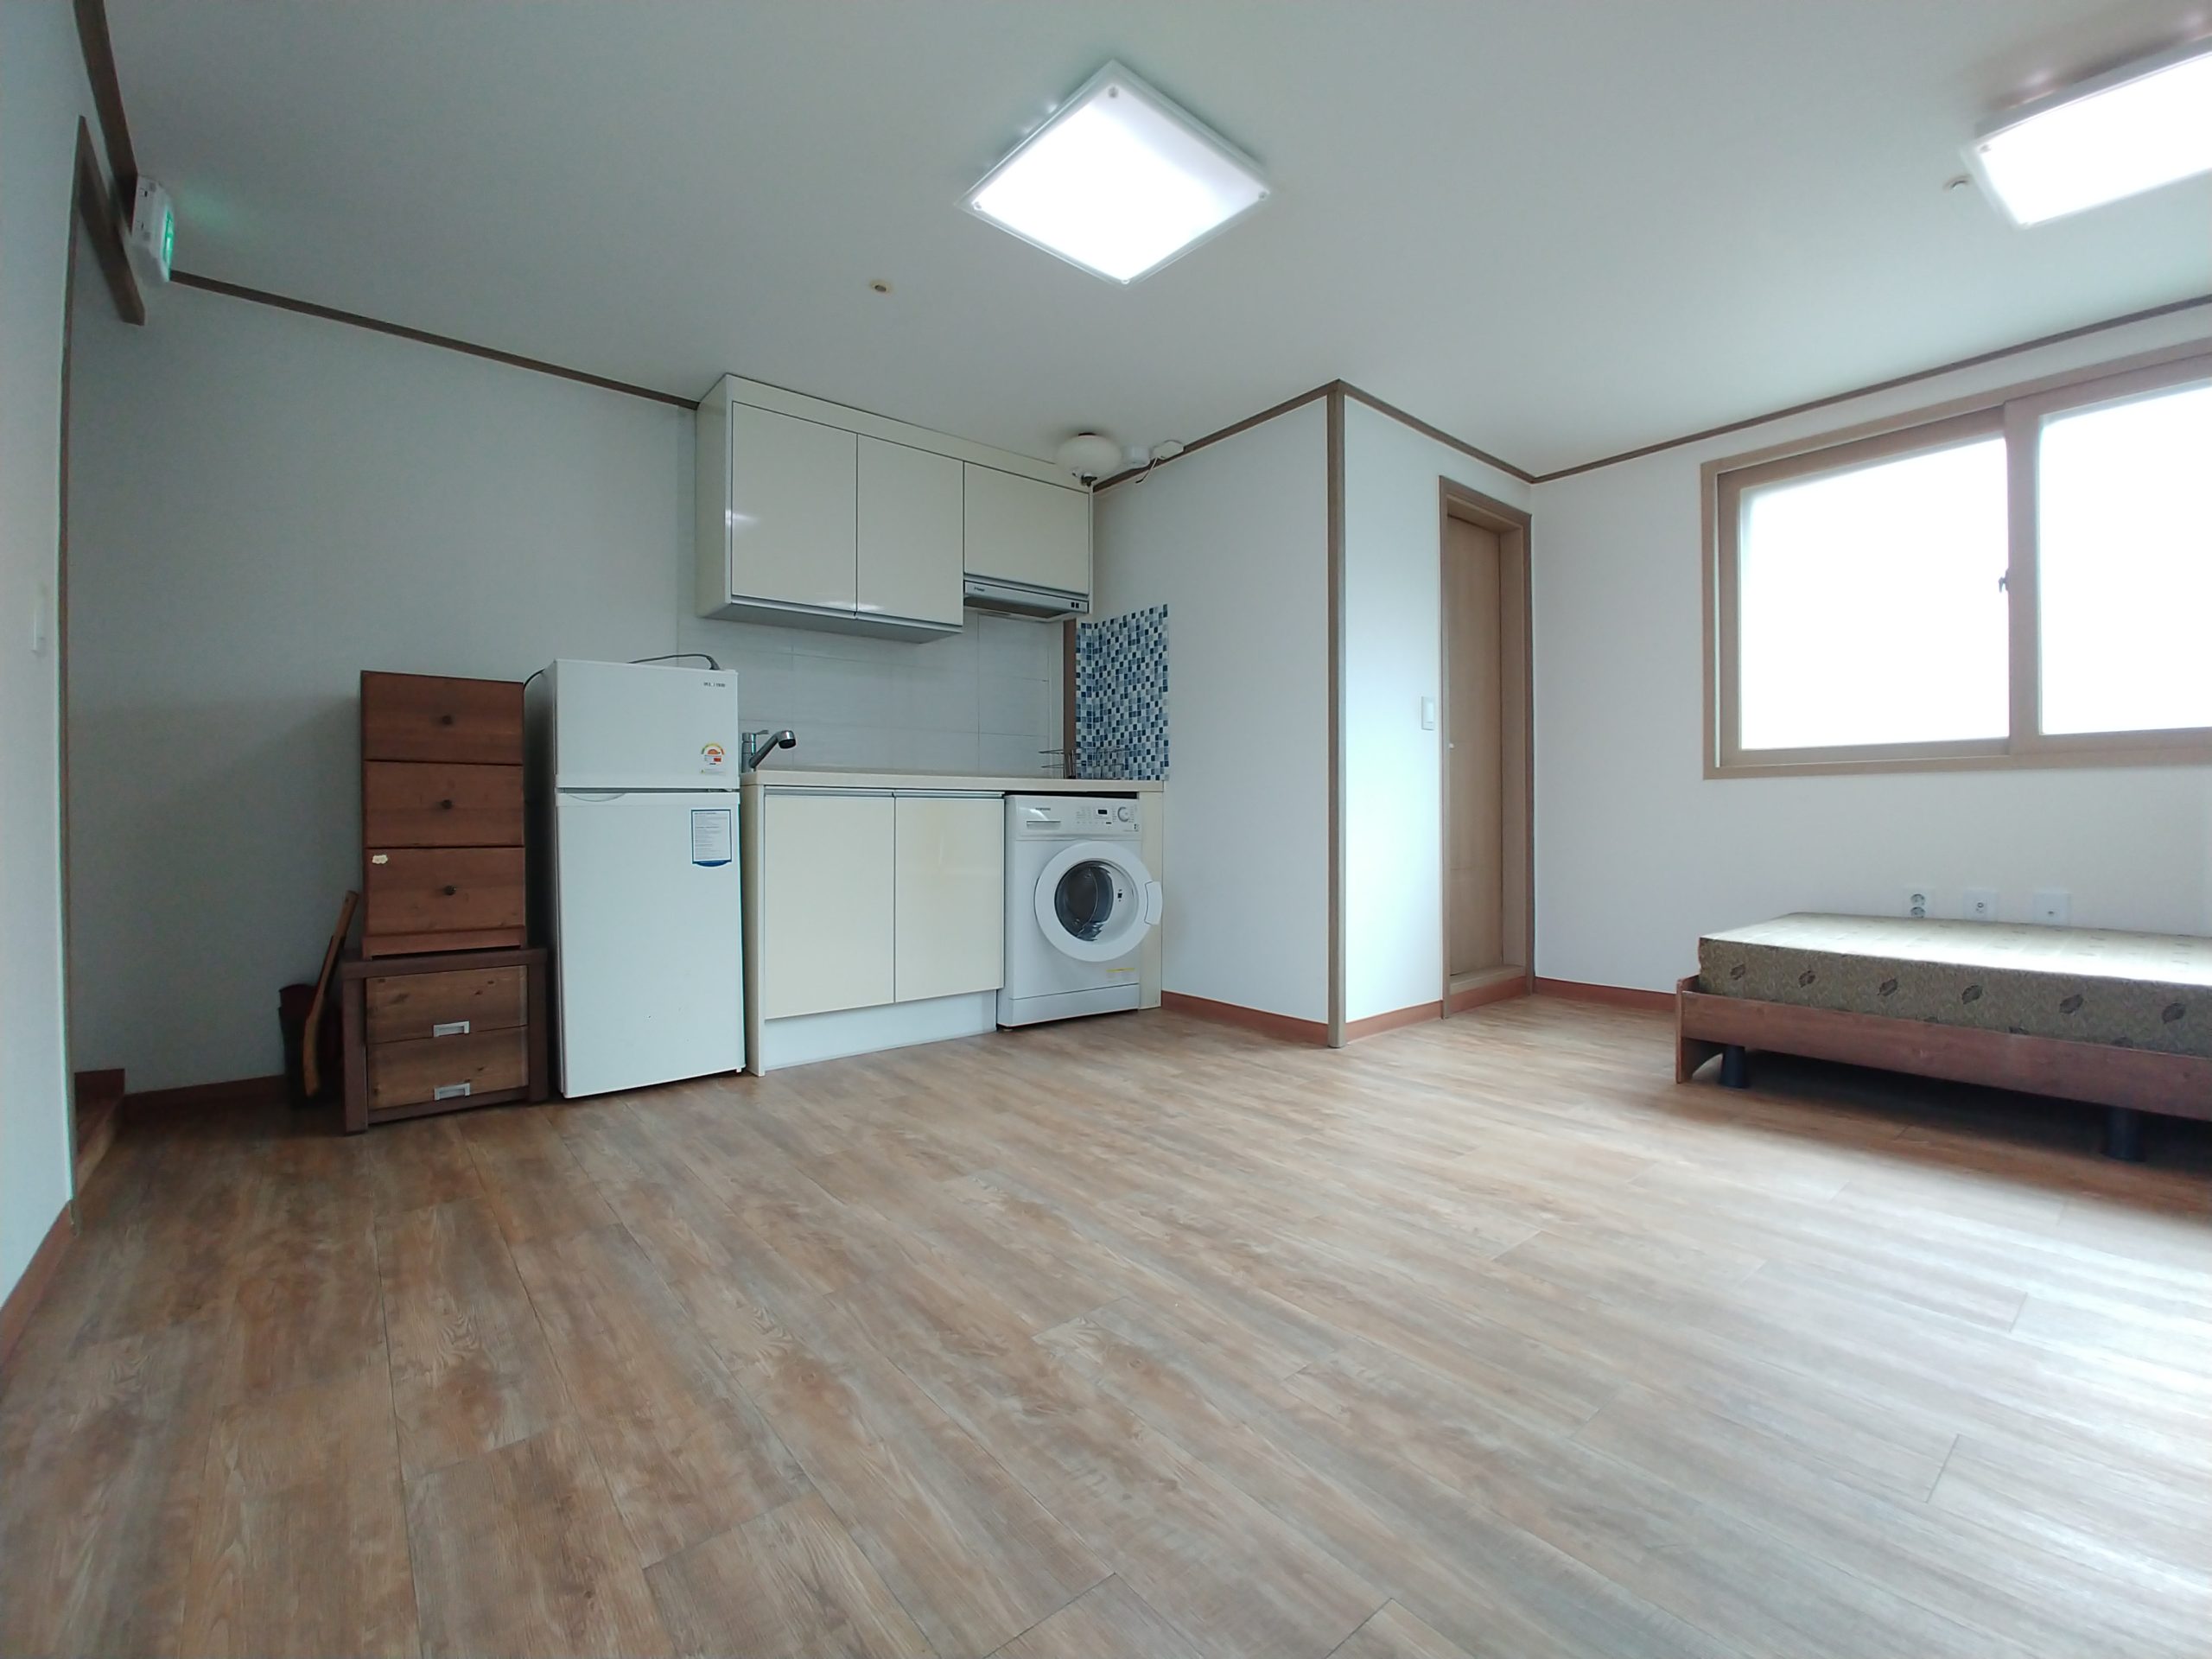 HANSUNG UNIVERSITY/ BOMUN STATION- 1000/60+5 LONG-TERM STUDIO (INCLUDED INTERNET&WATER FEES)